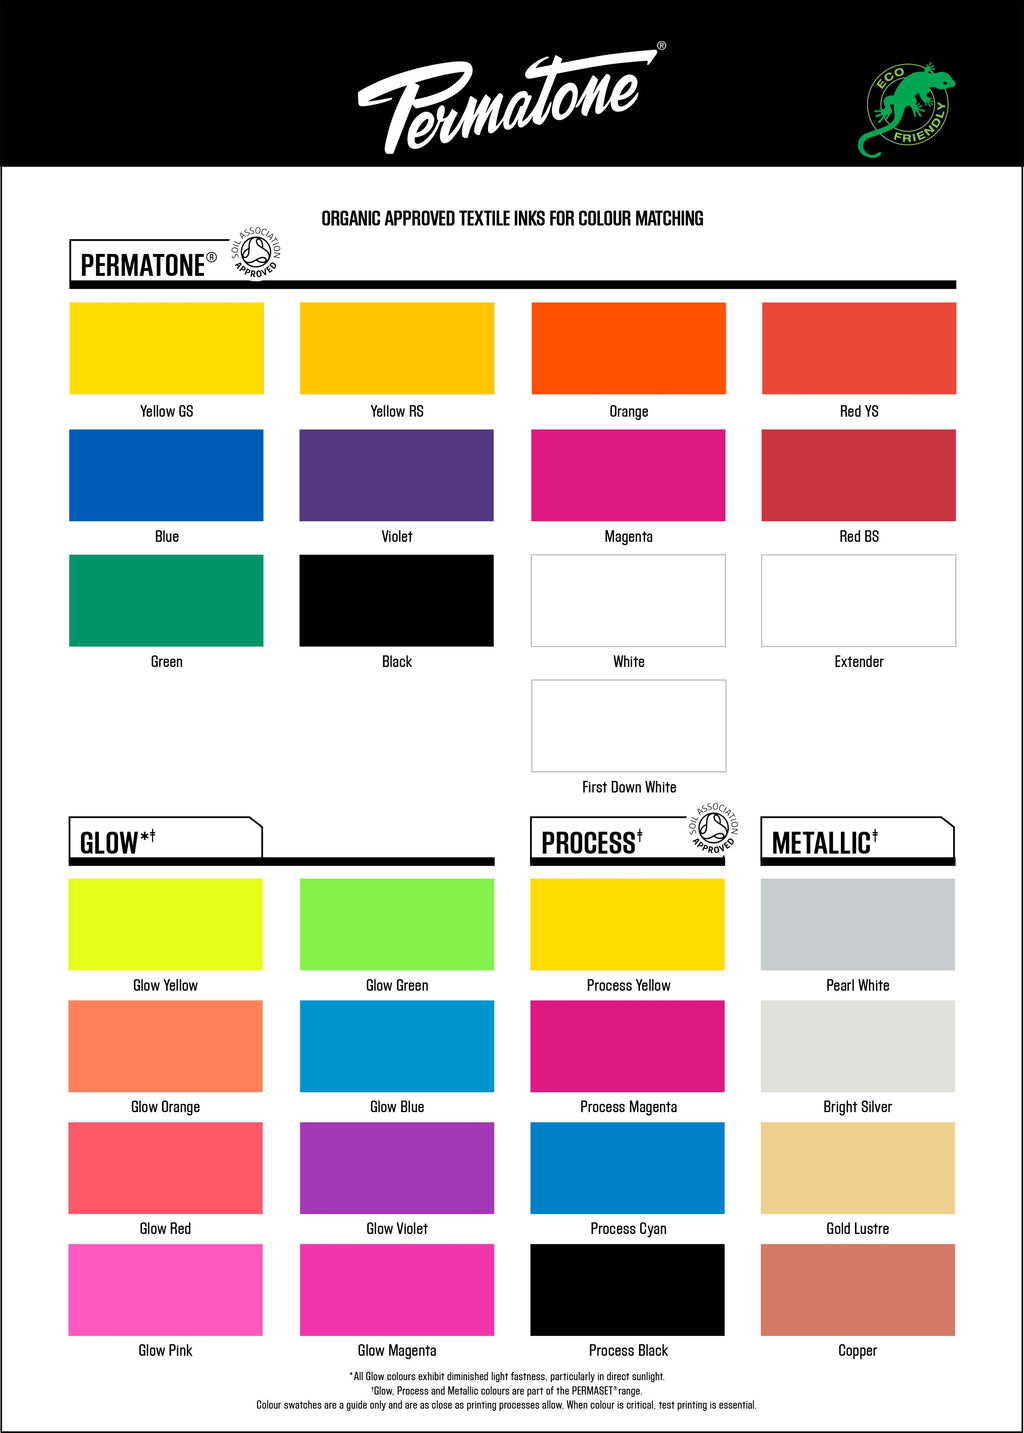 PERMATONE soil association approved textile screen printing inks for color matching